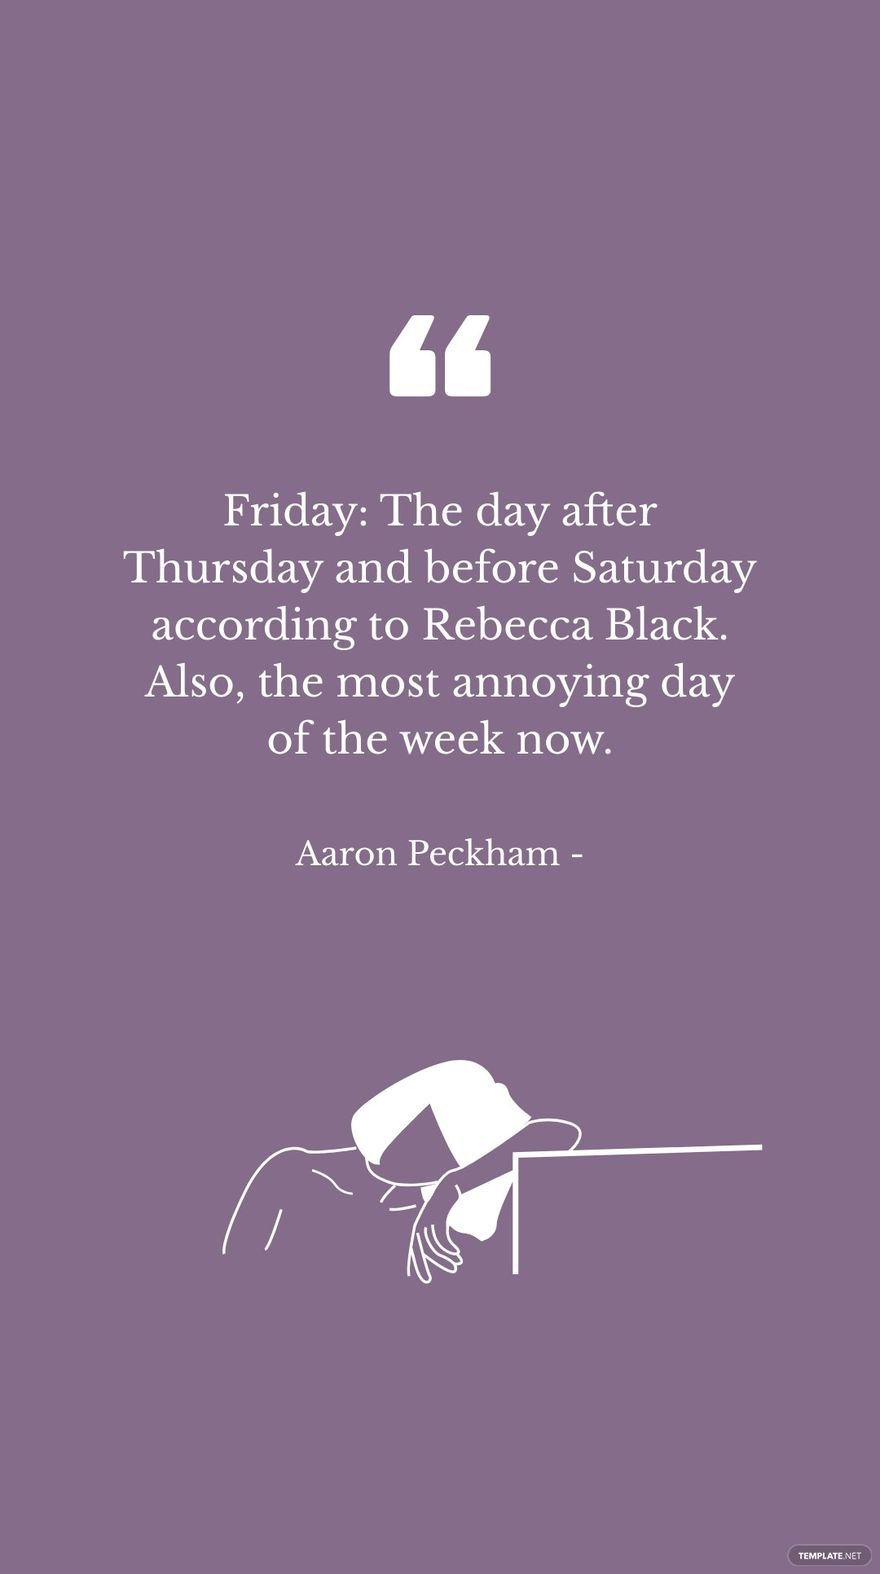 Free Aaron Peckham - Friday: The day after Thursday and before Saturday  according to Rebecca Black. Also, the most annoying day of the week now. -  Download in JPG